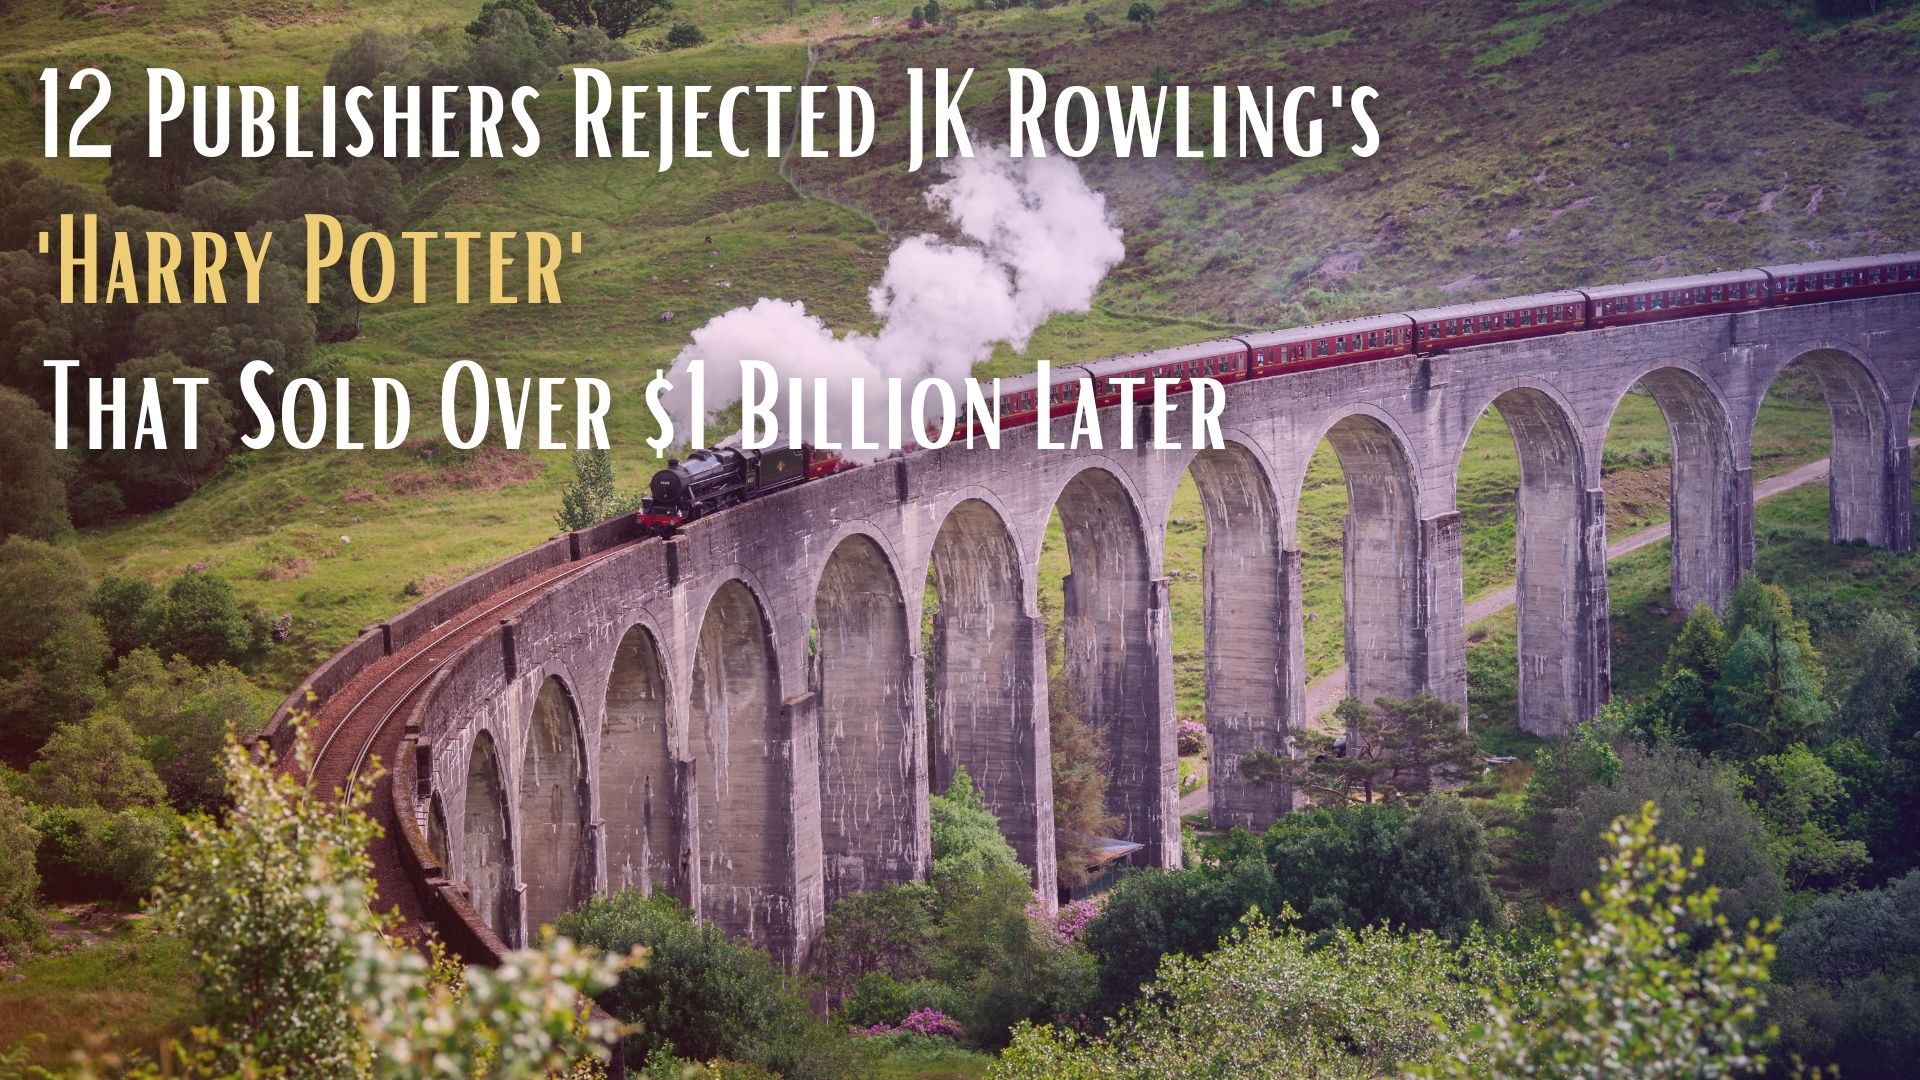 12 Publishers Rejected JK Rowling's 'Harry Potter' That Sold Over $1 Billion Later